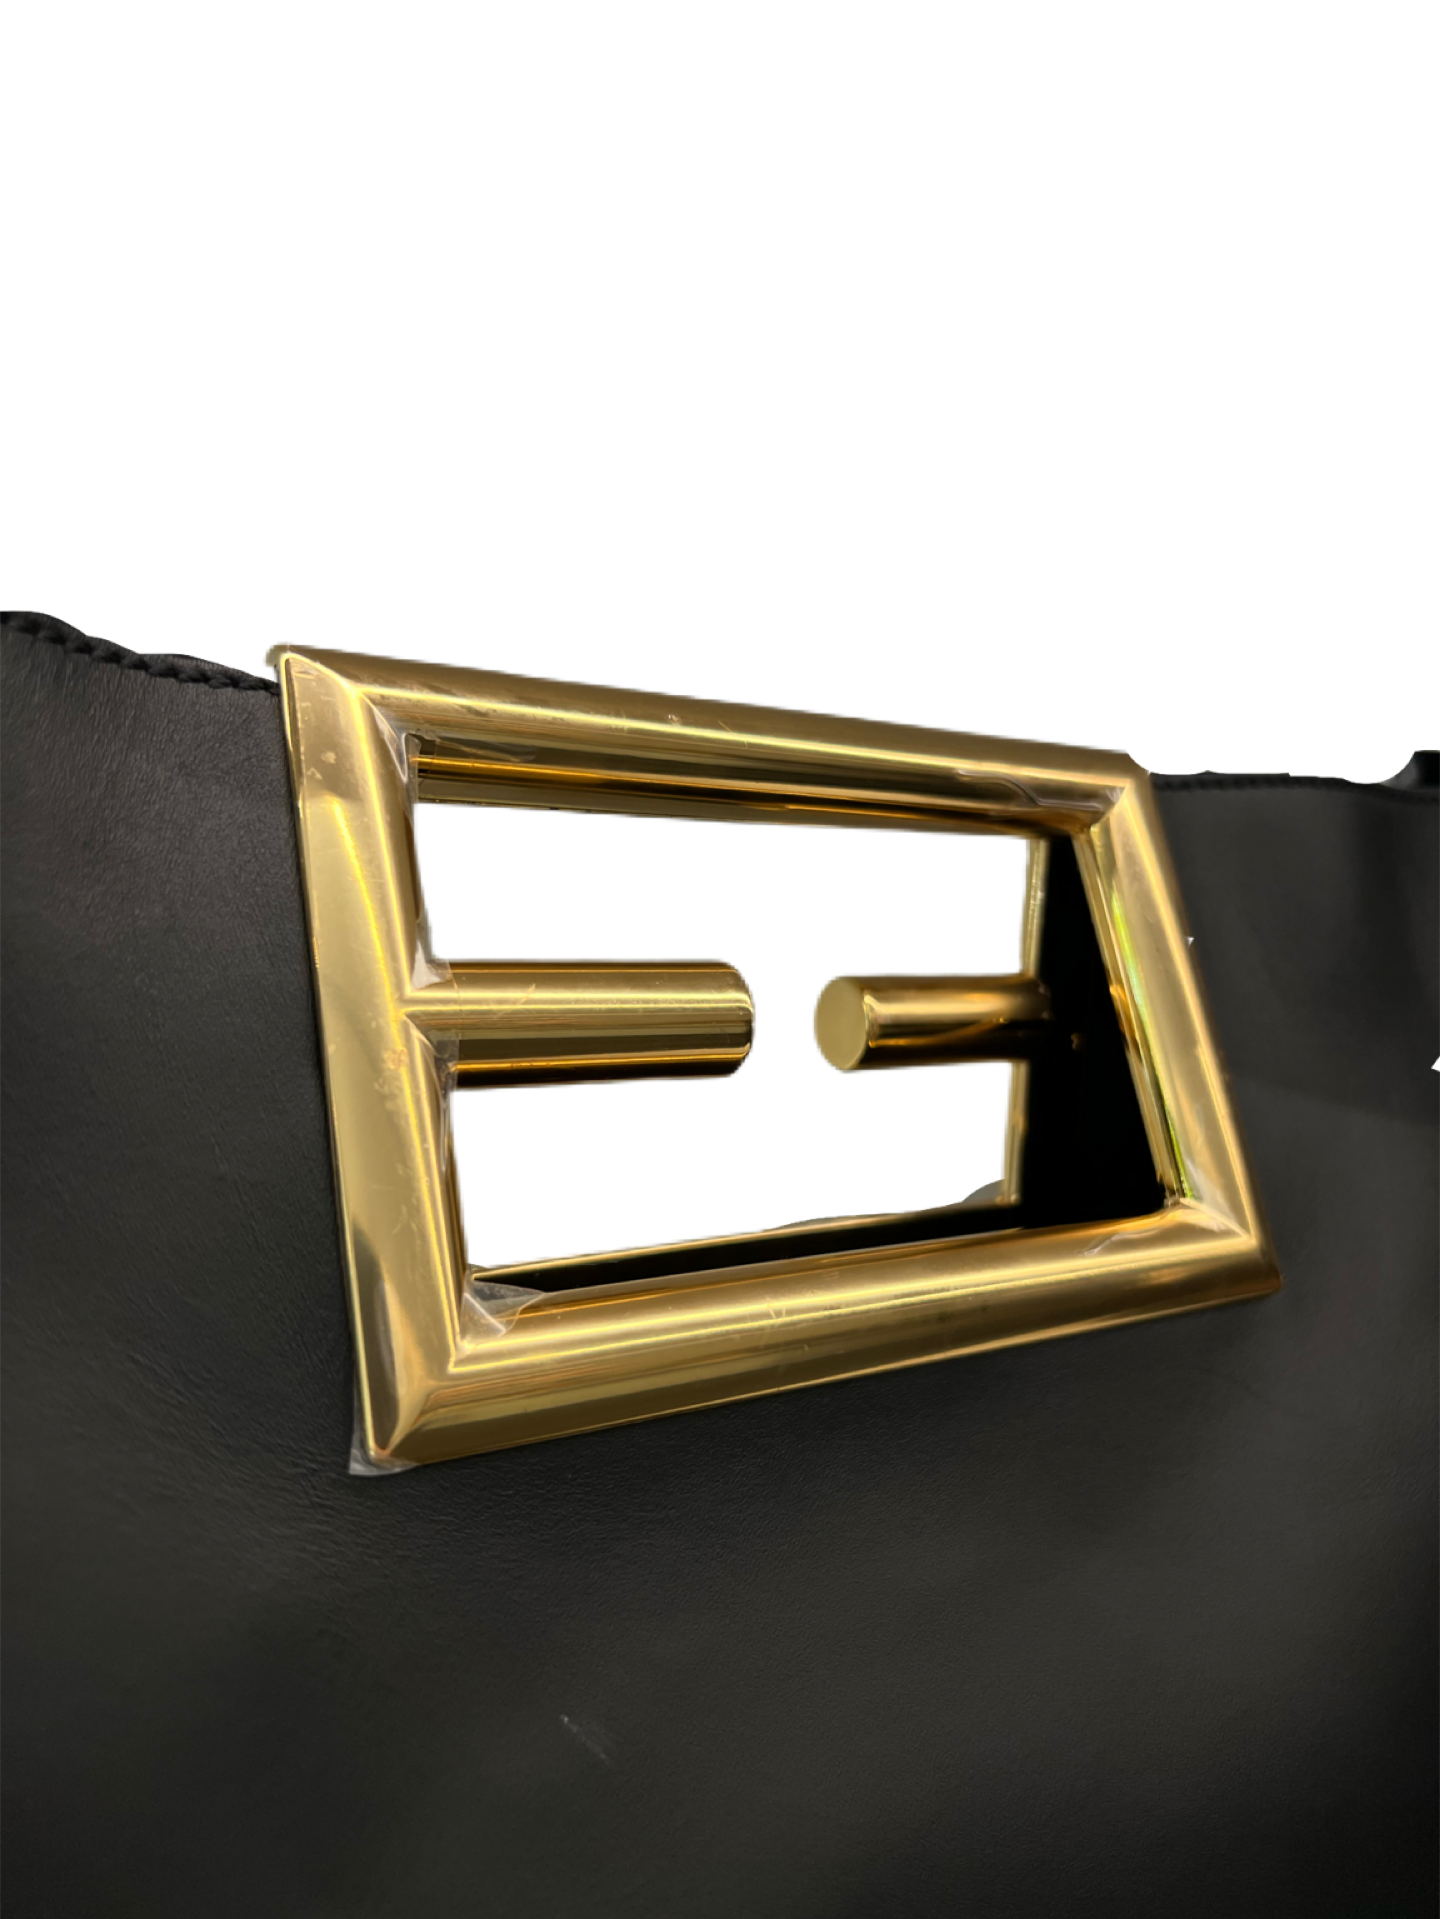 Fendi Black By The Way Gold Hardware Leather Tote. Size: XL